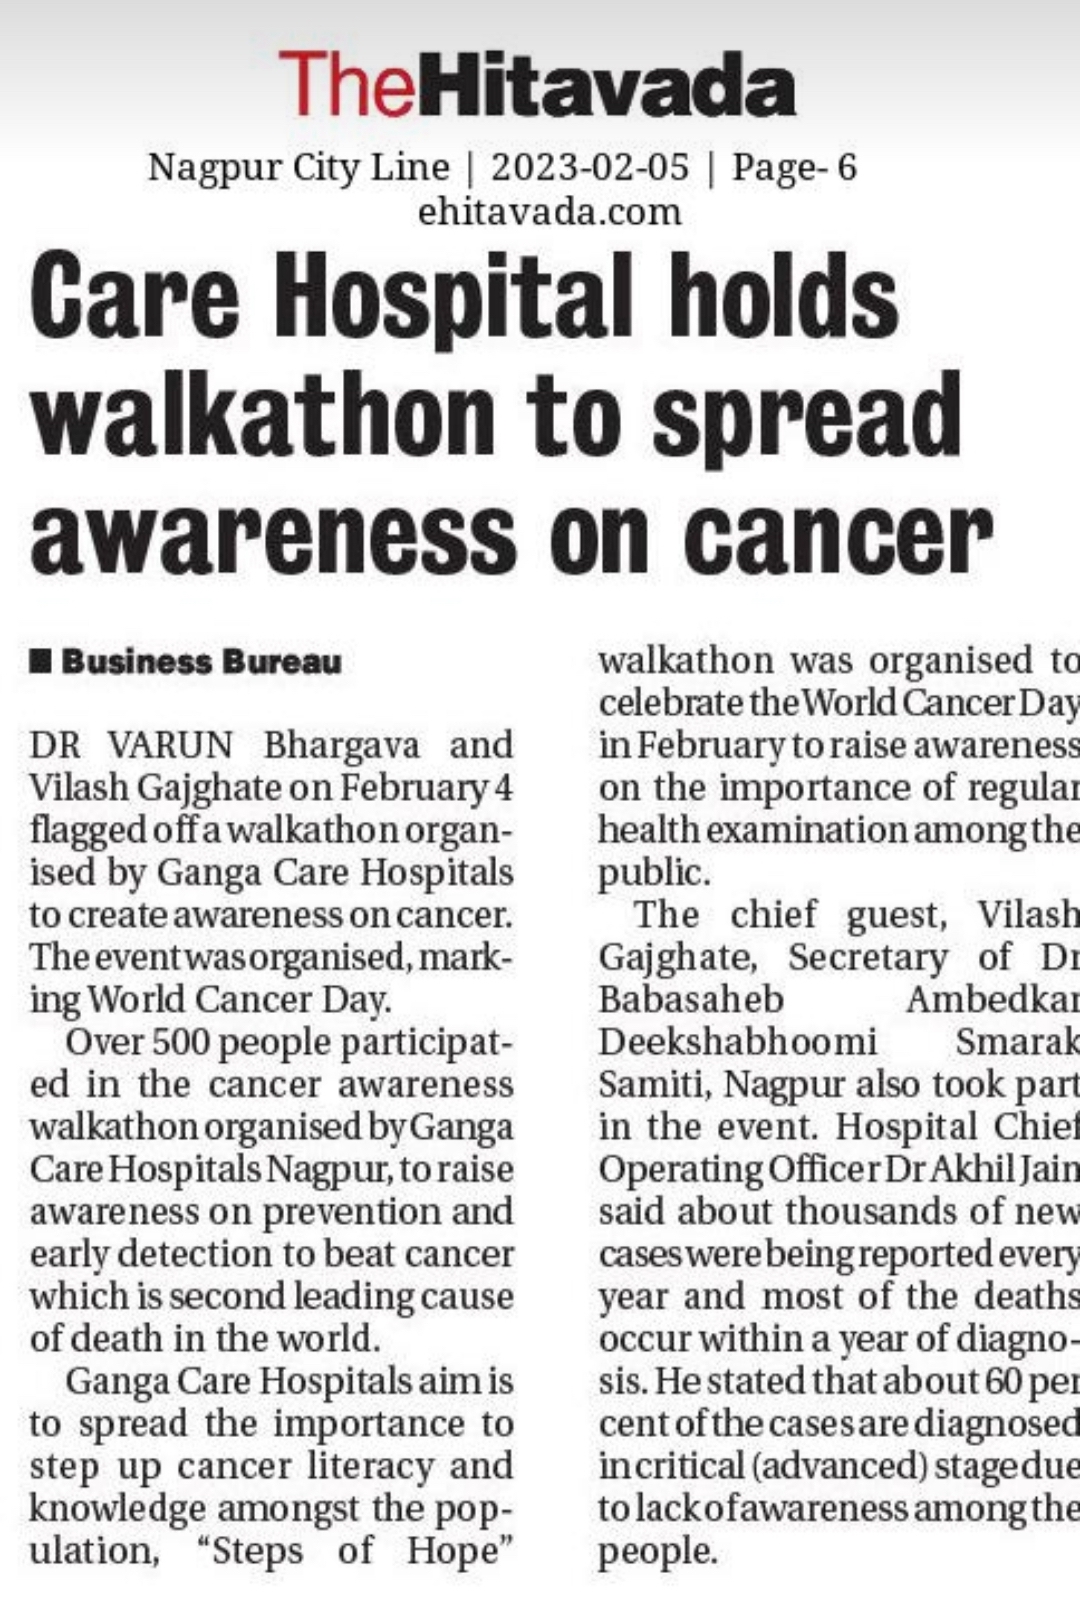 CARE Hospitals holds walkhathon to spread awarness on cancer